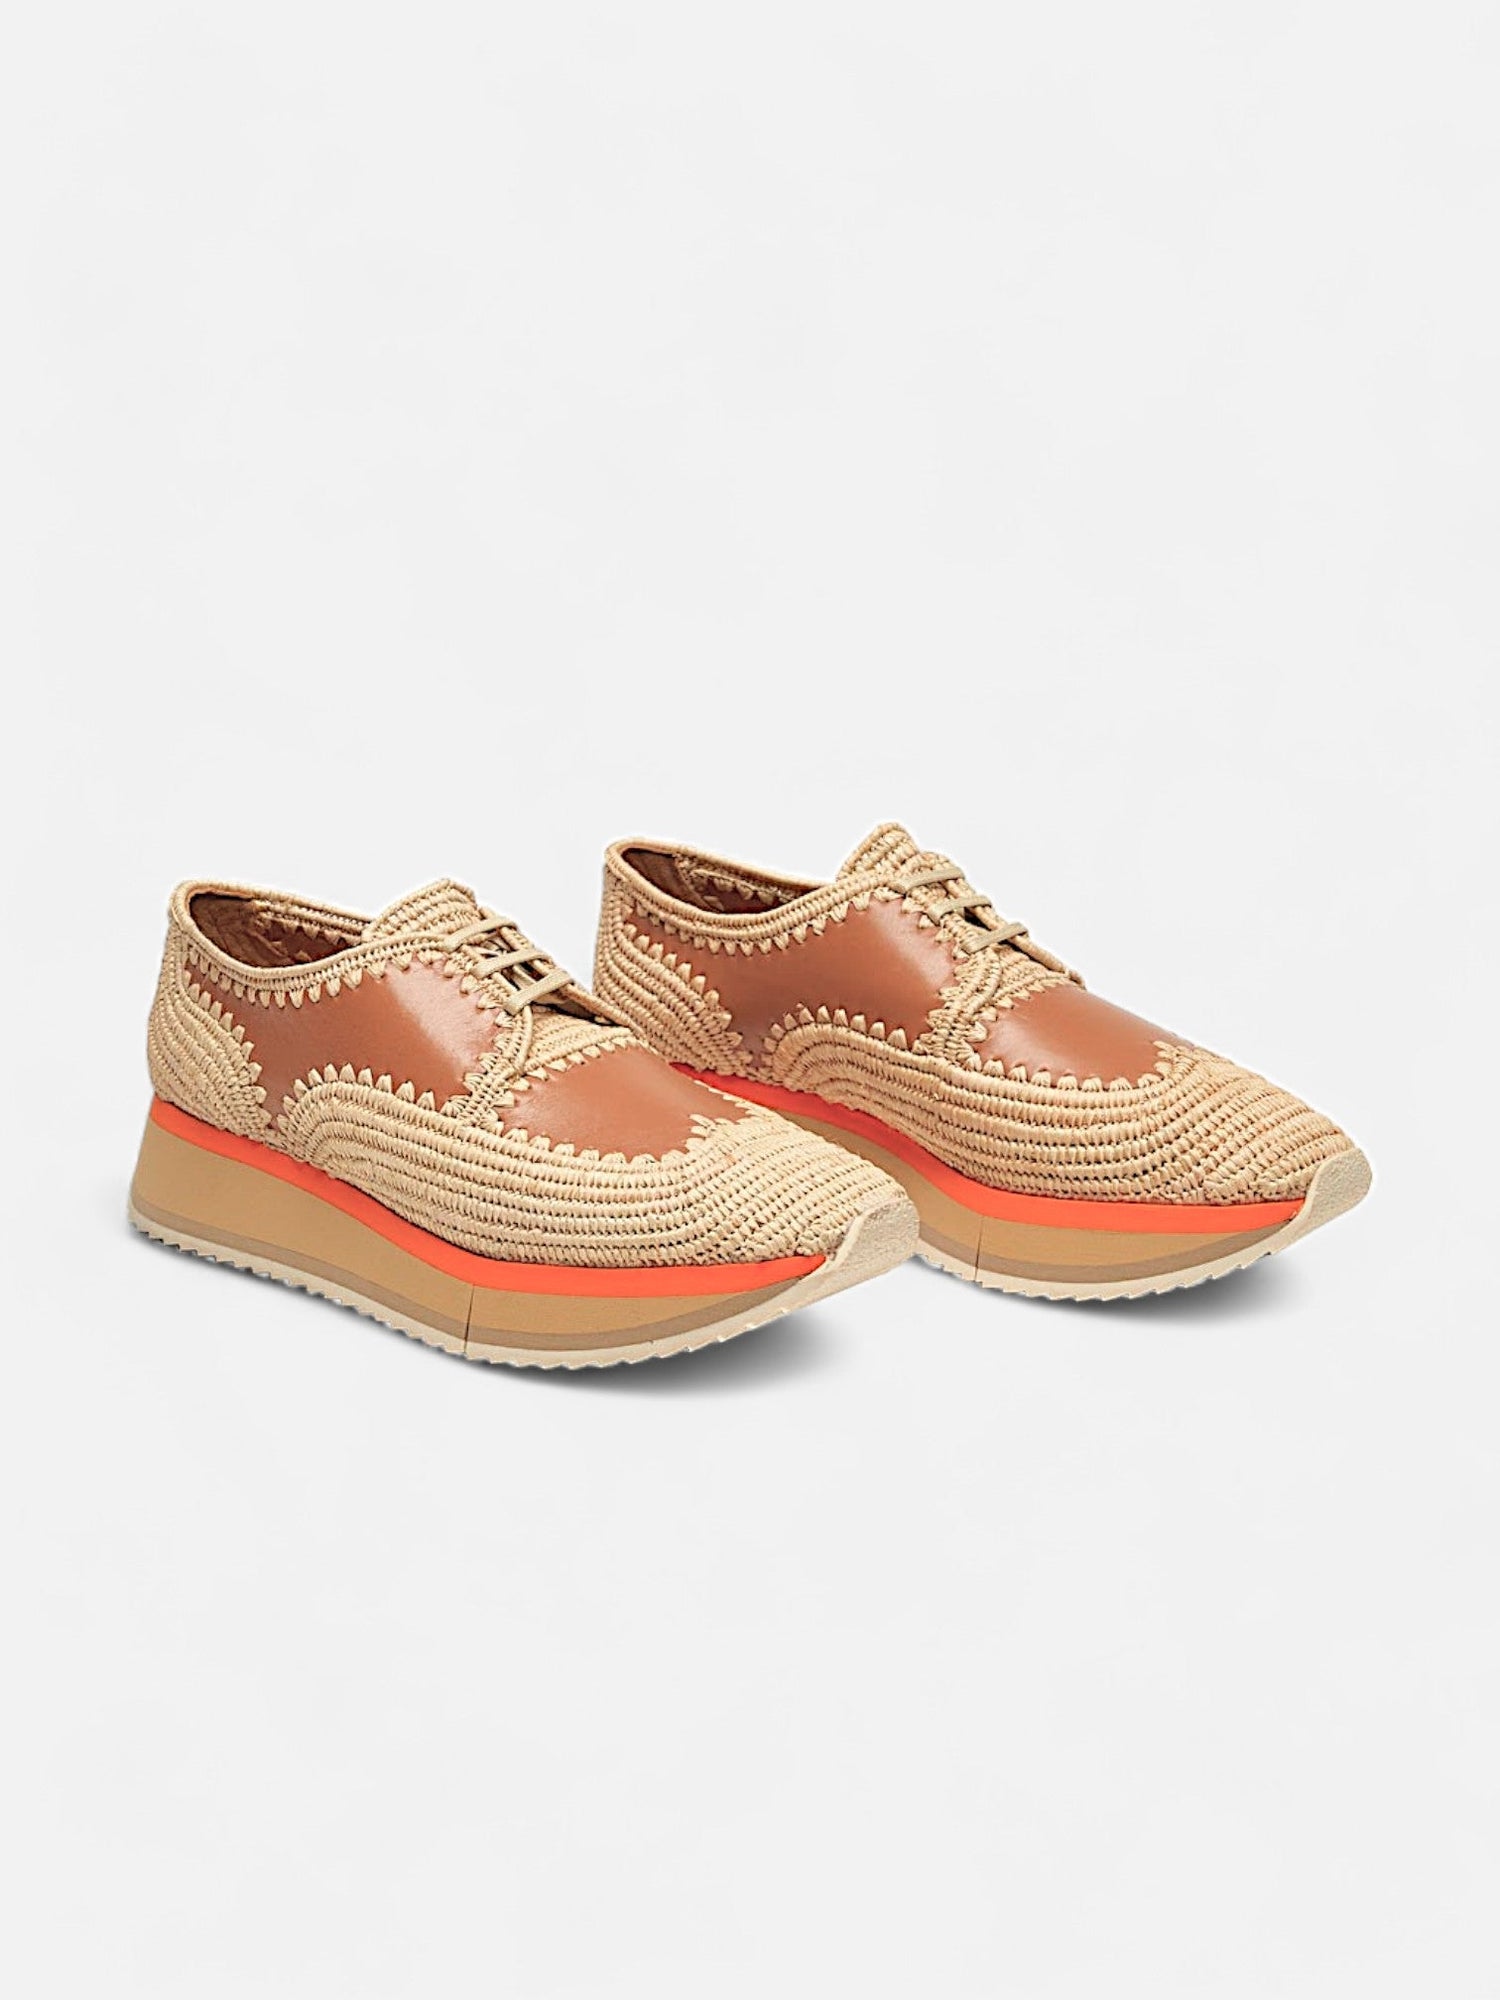 SNEAKERS - ONEIL sneakers, calfskin straw and brown - 3606063643214 - Clergerie Paris - Europe